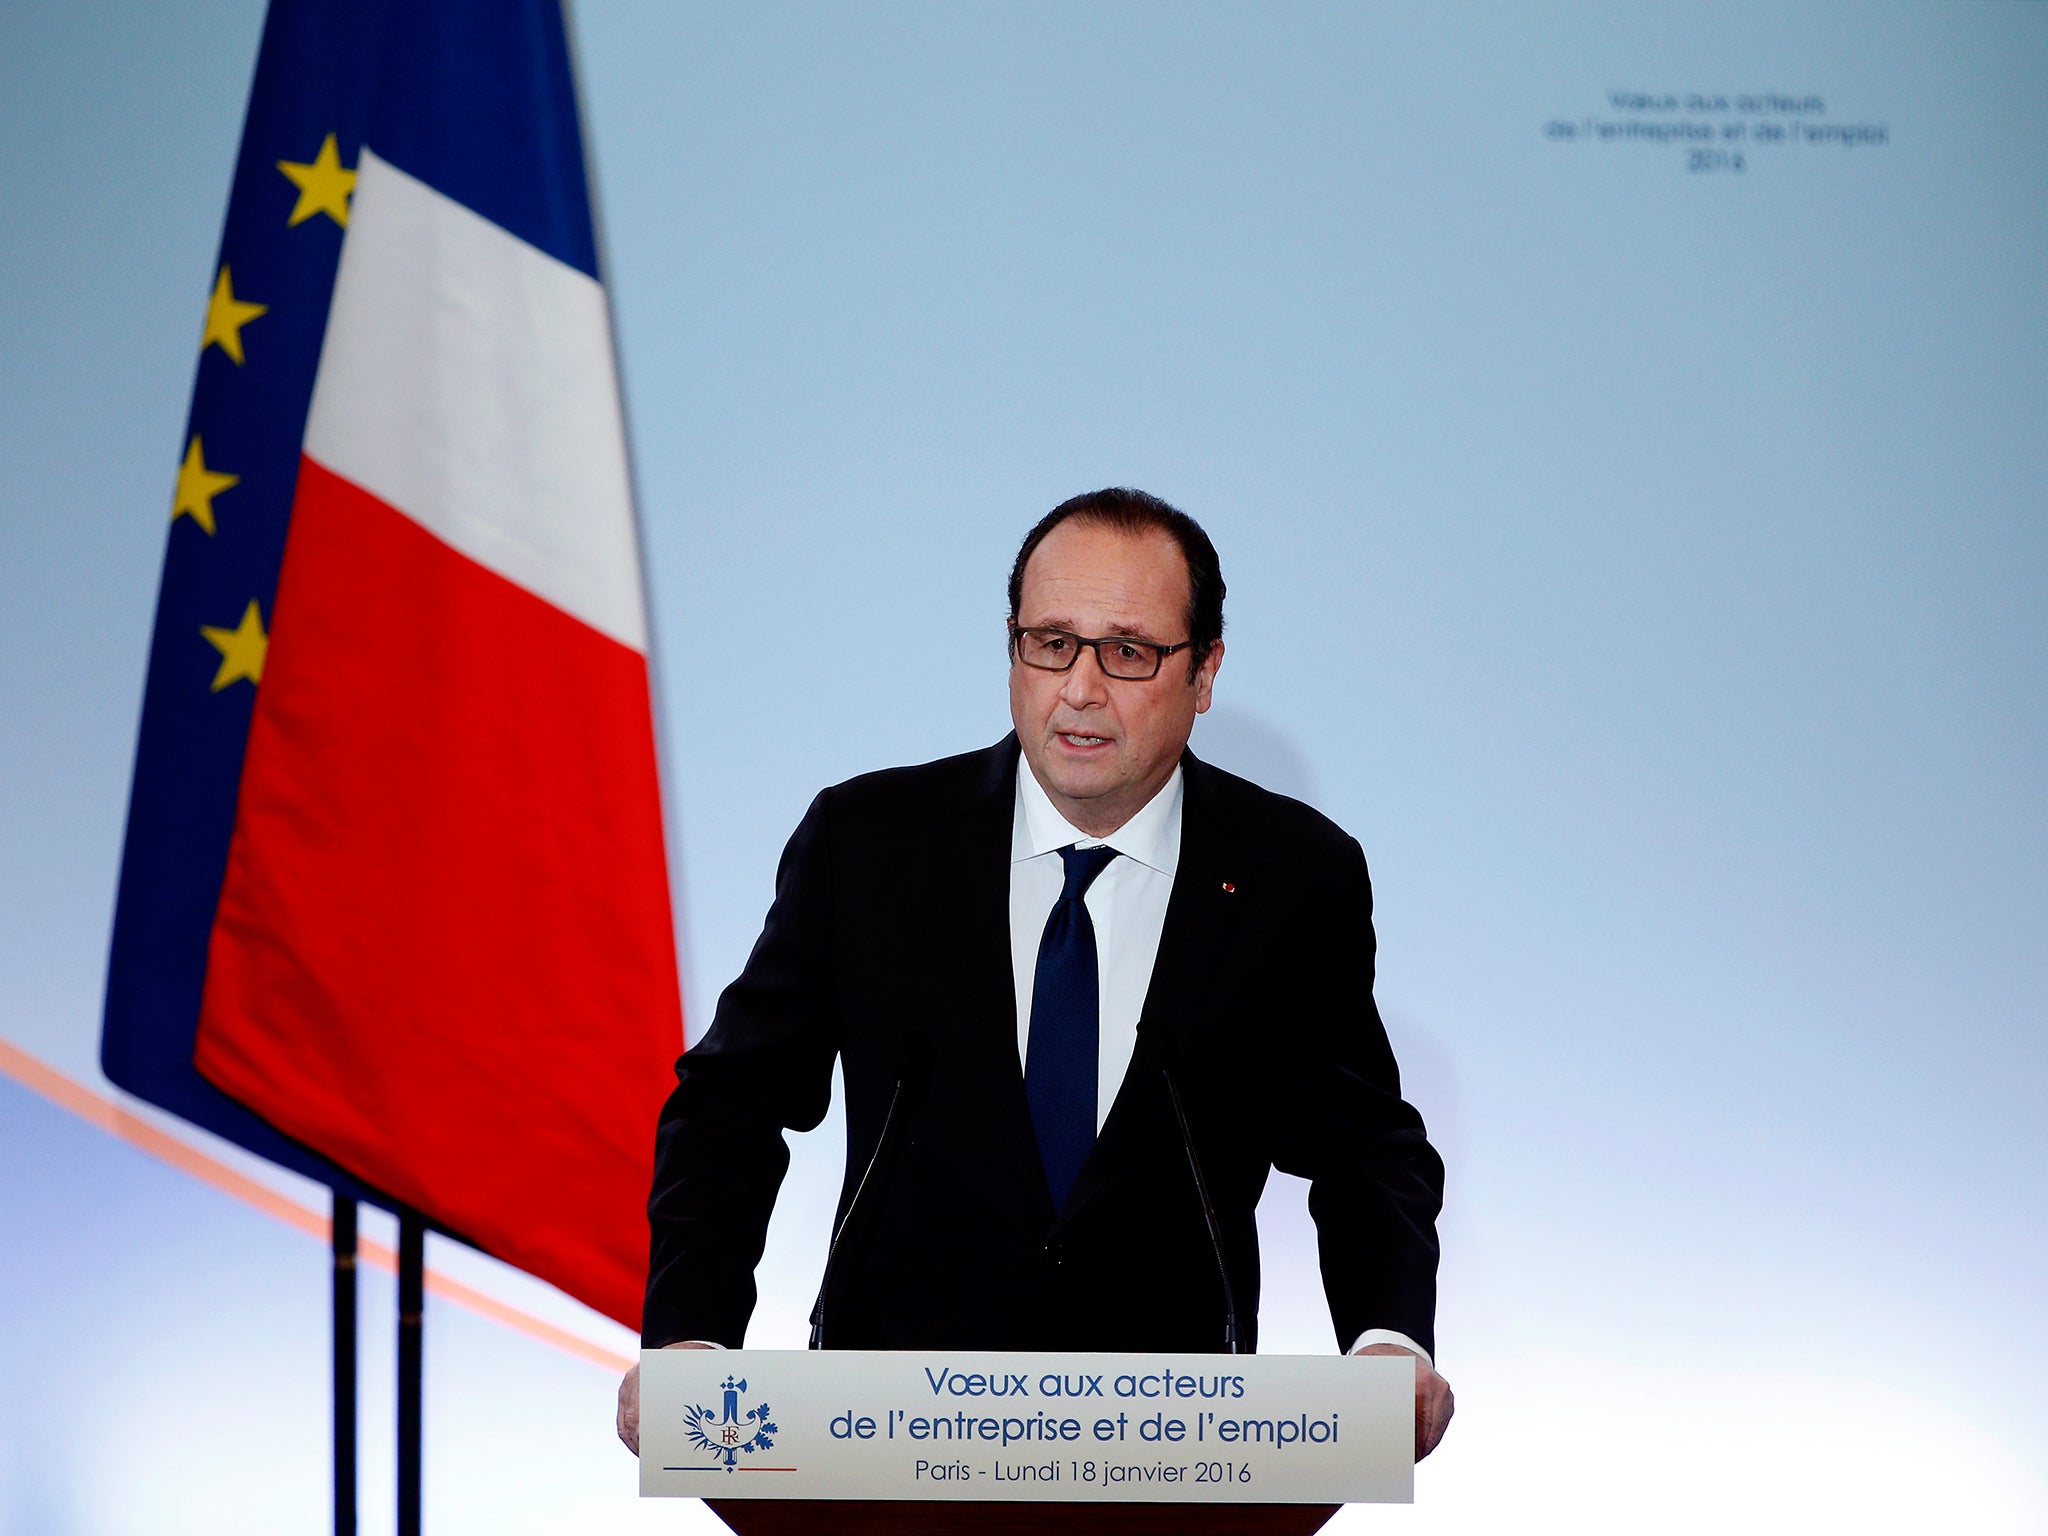 Mr Hollande dismissed suggestions his plan was merely cosmetic in a New Year address to business leaders